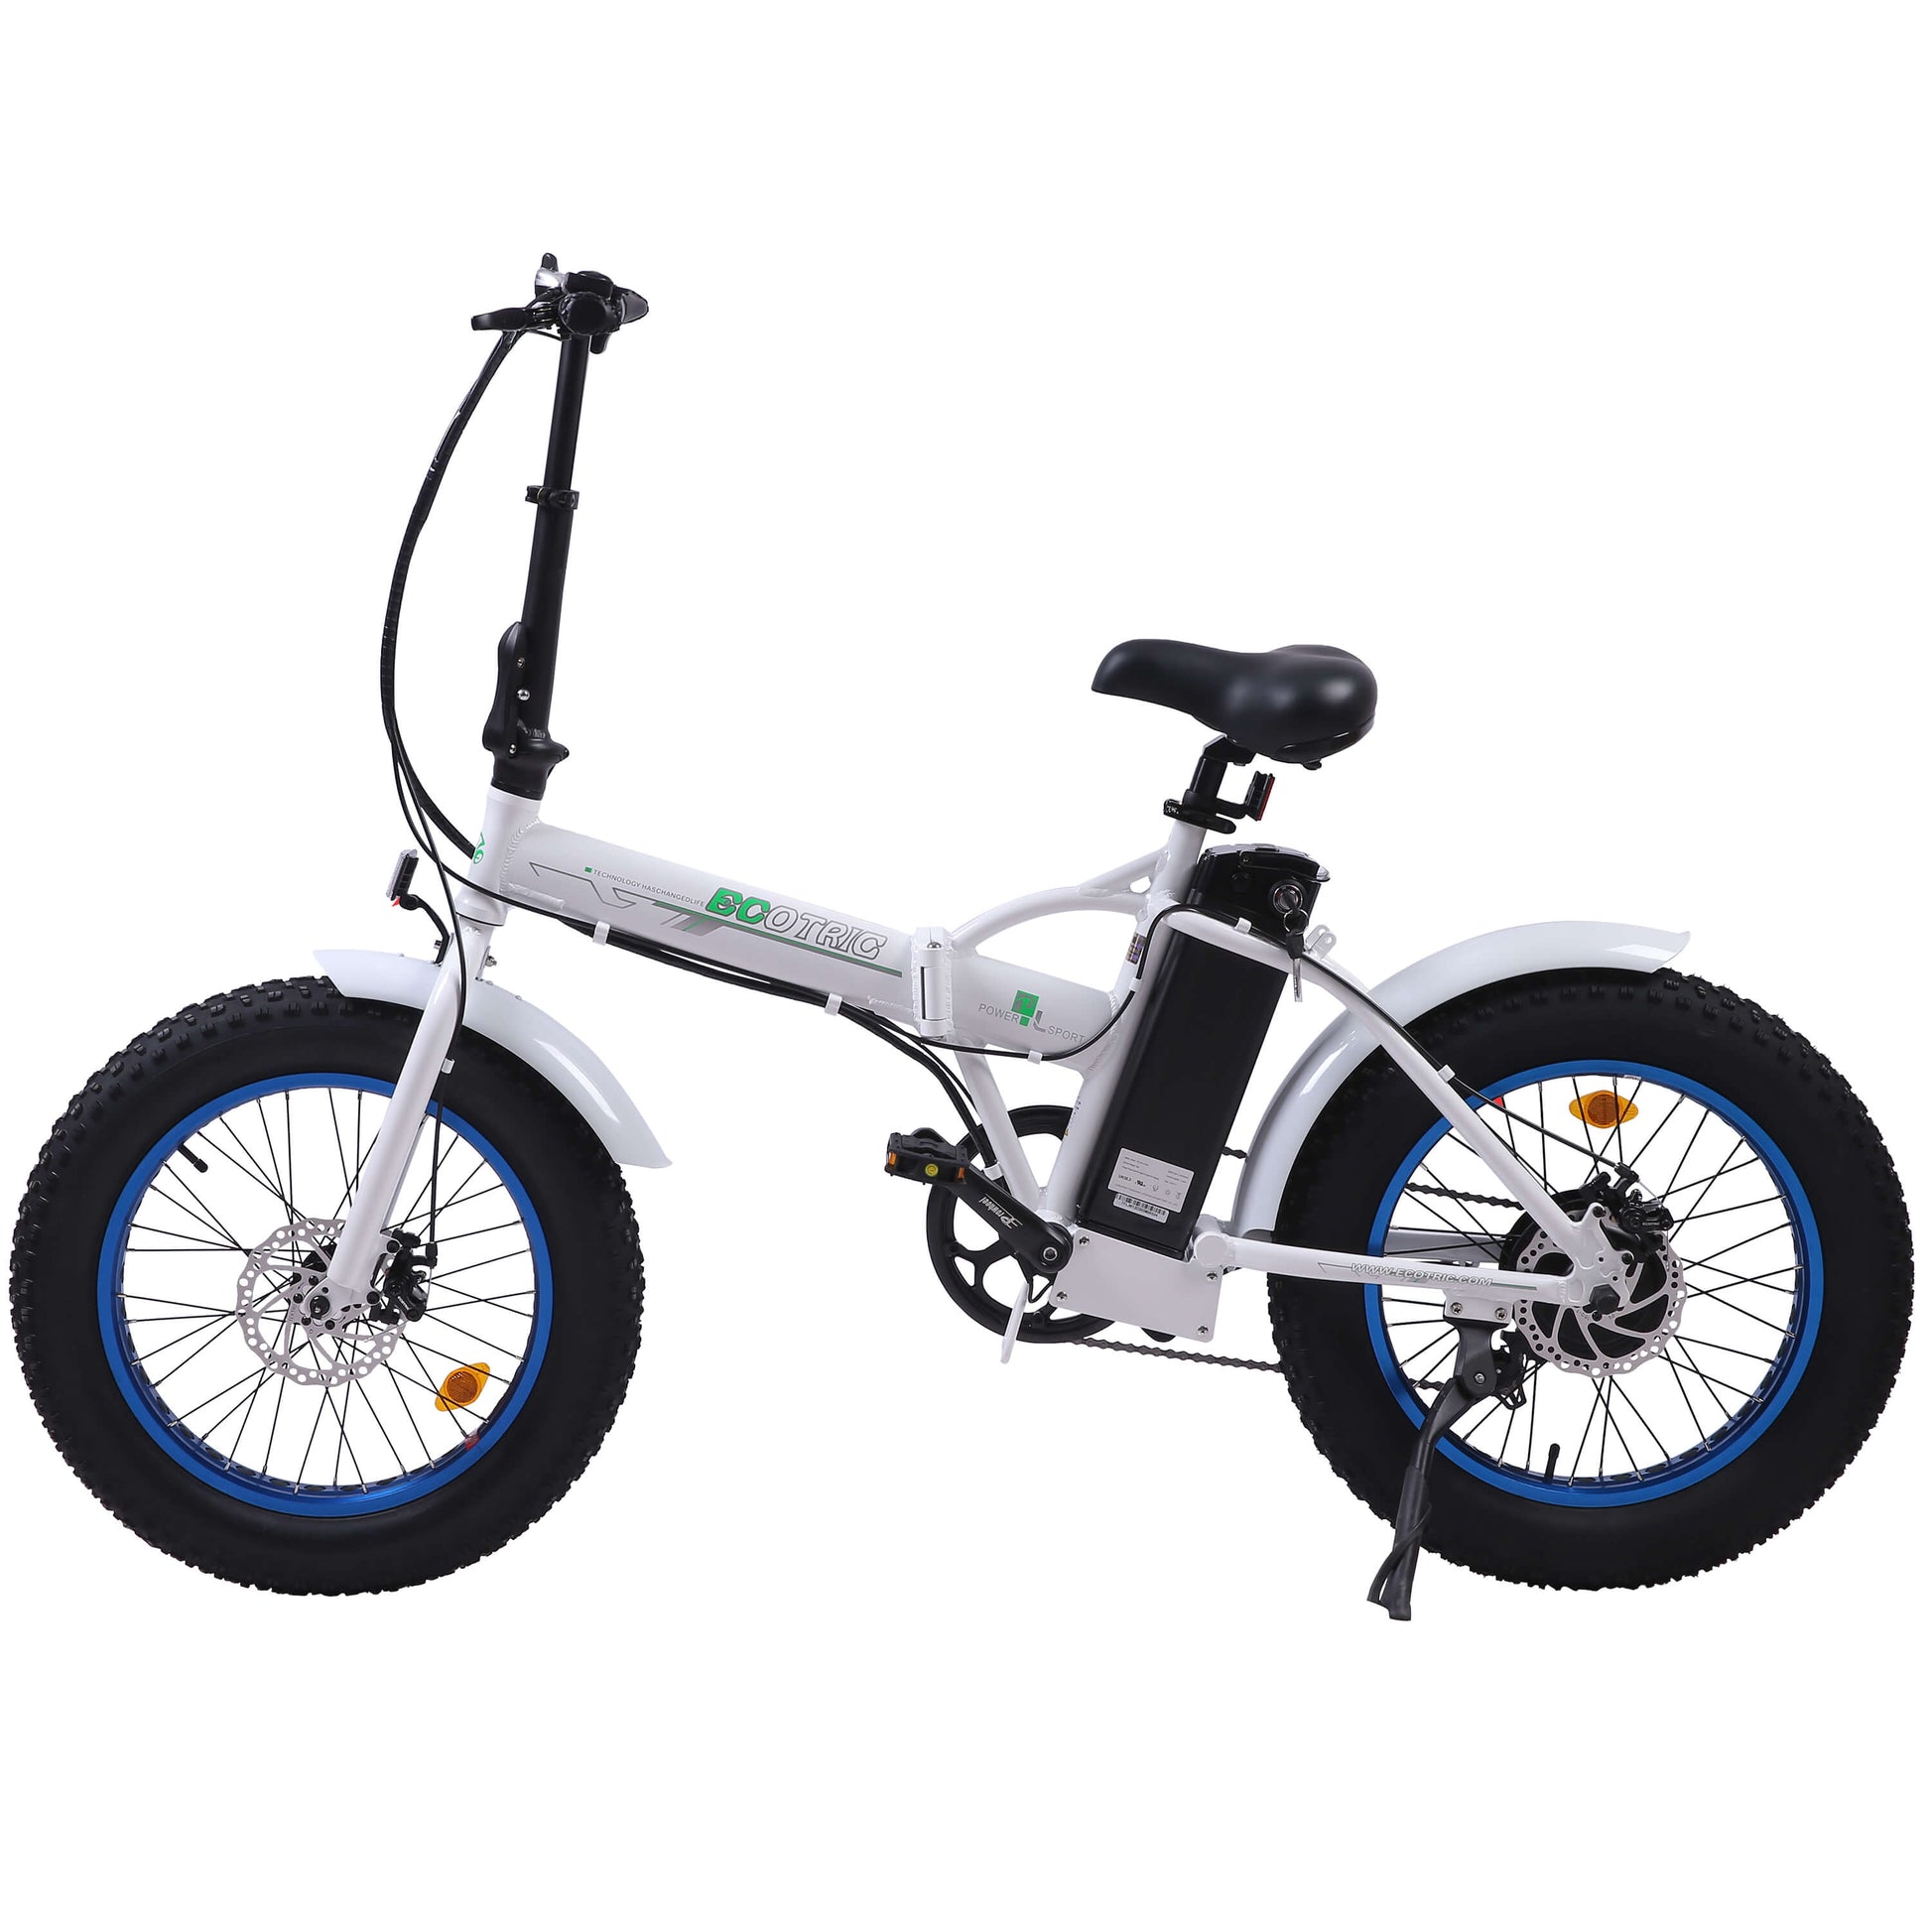 UL Certified-Fat Tire Portable and Folding Electric Bike-White and Blue - 7